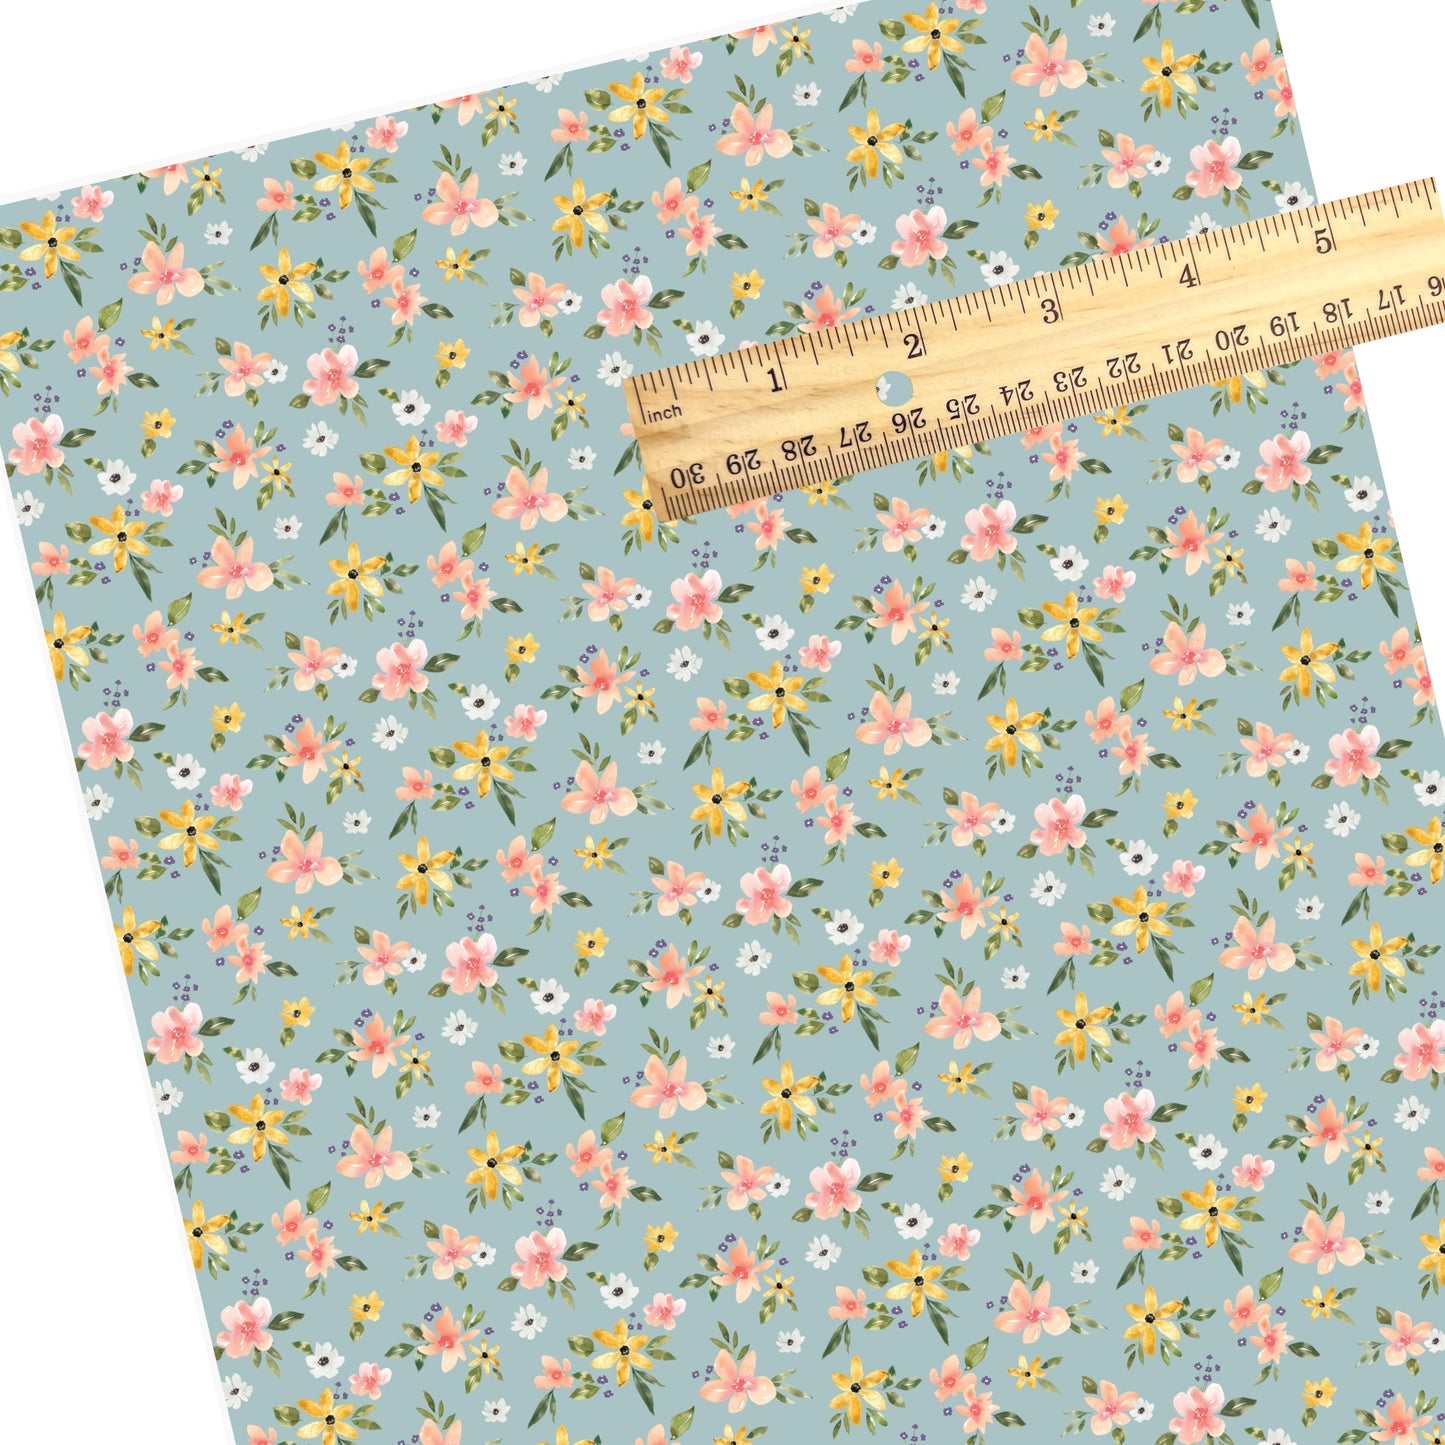 Different flowers yellow, white, and pink flowers on blue faux leather sheets